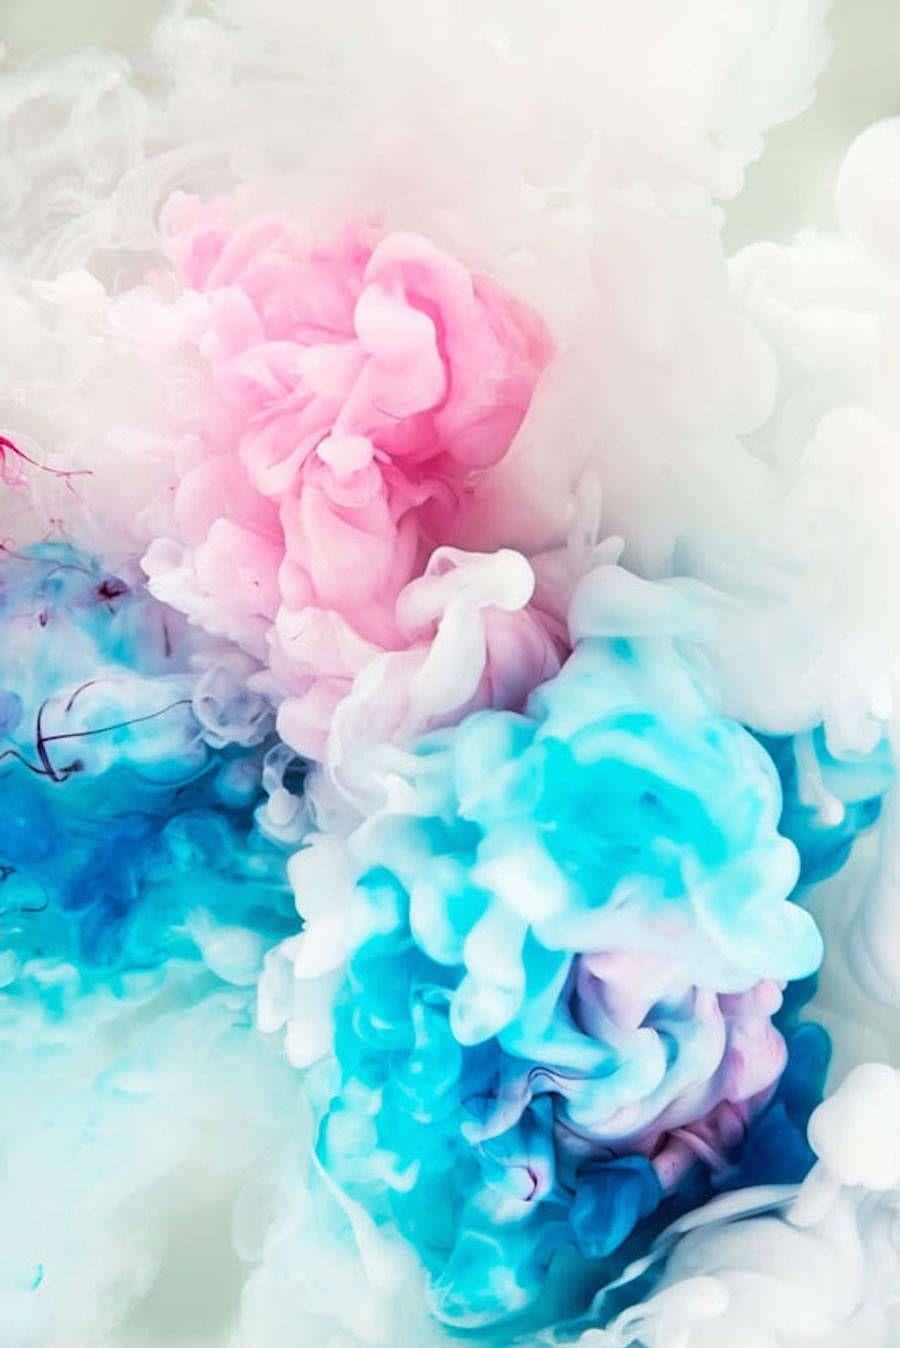 Aesthetic Colored Abstract Ink Explosions Cotton Candy Background